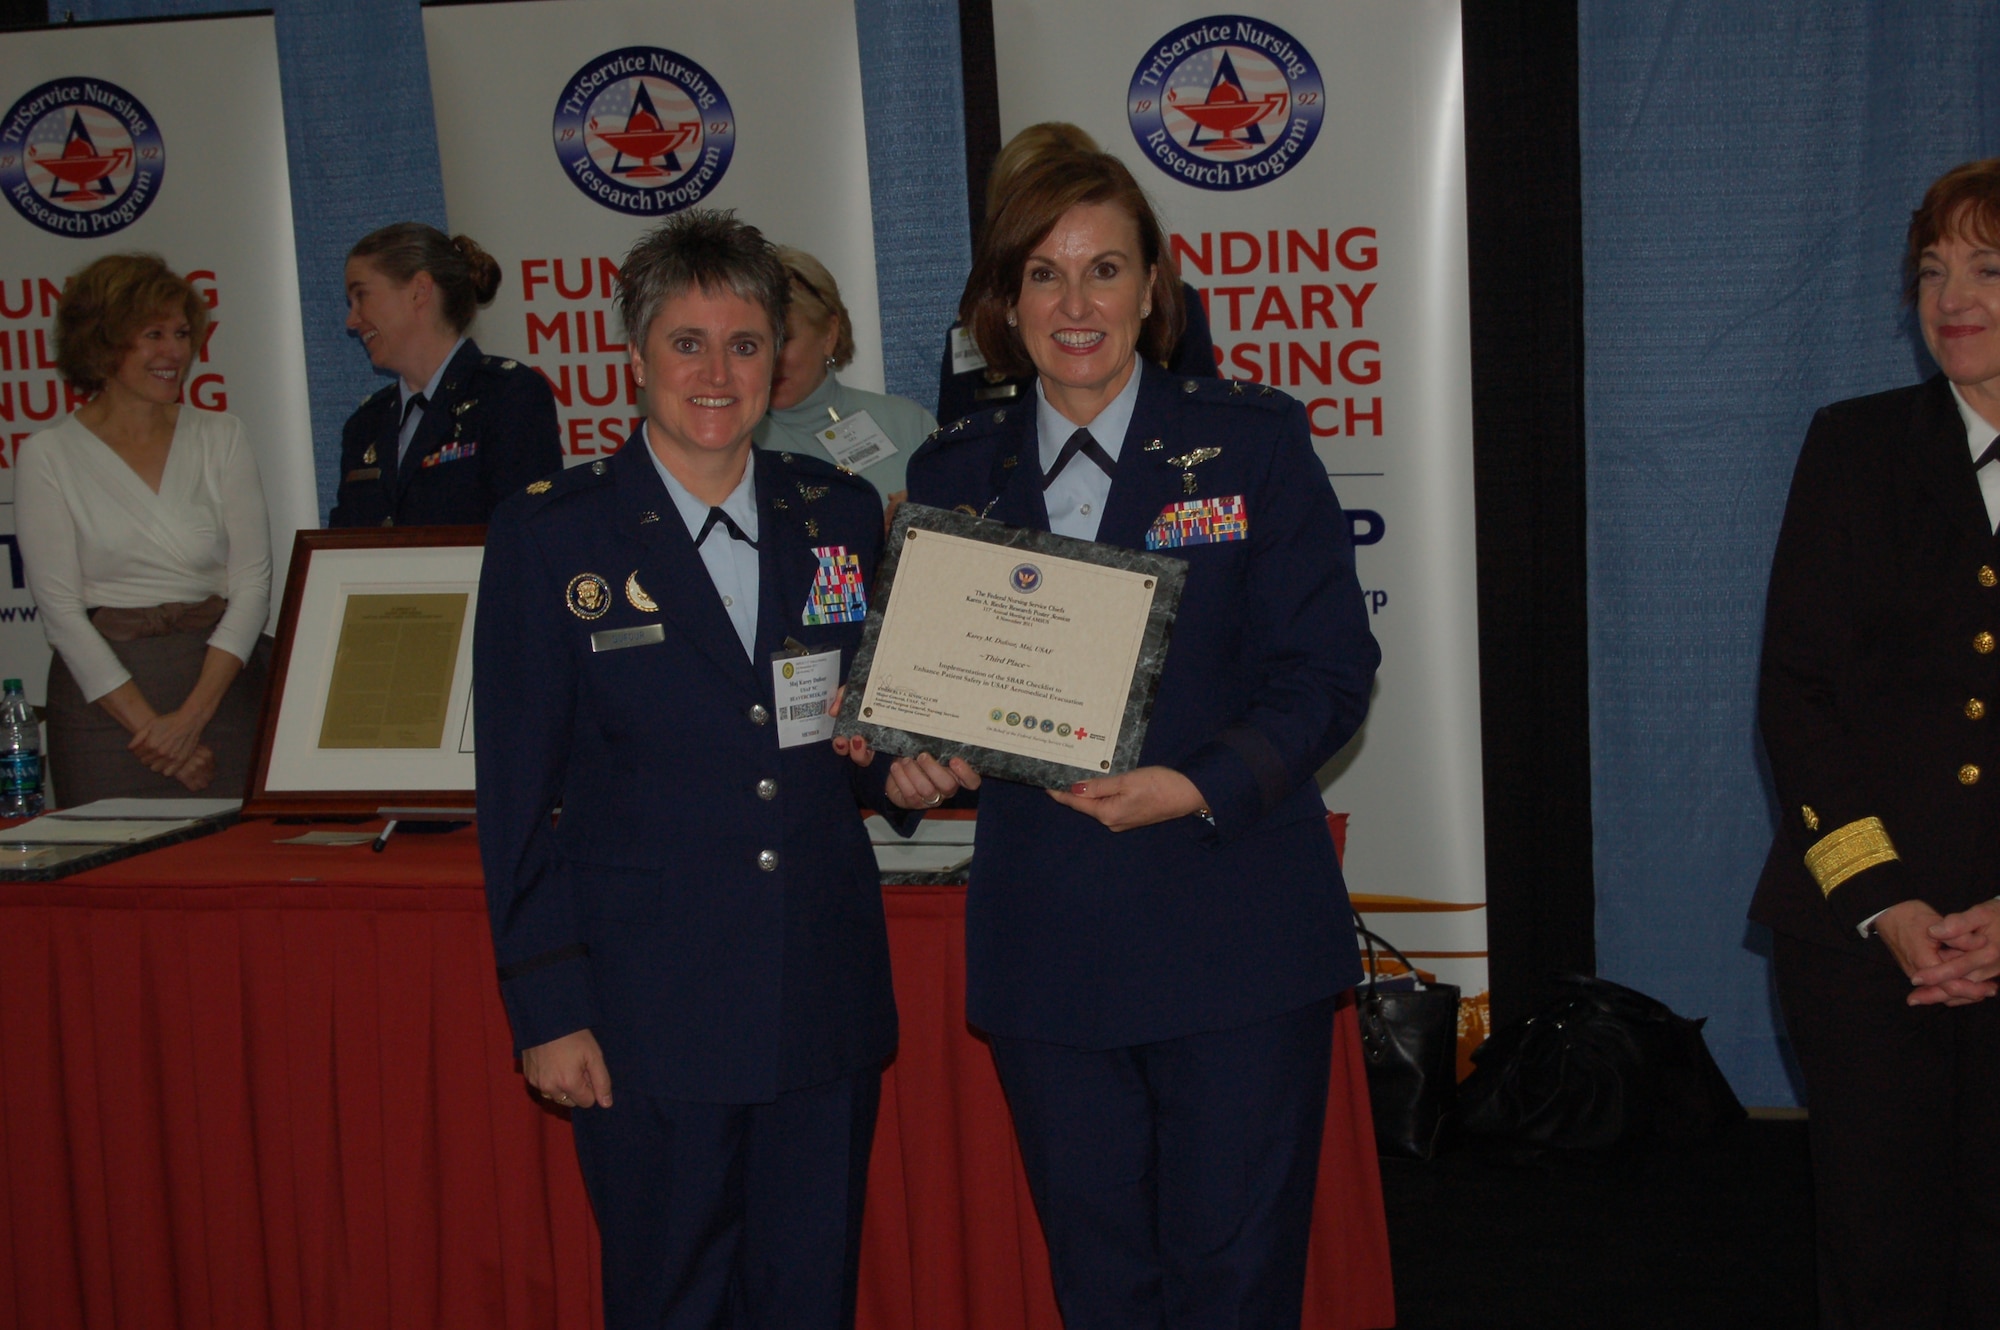 At the 117th annual Association of Military Surgeons United States Conference held in San Antonio, Texas, on 6-9 Nov, Maj. Gen. Kimberly Siniscalchi, Assistant Surgeon General, Nursing Services and Medical Force Development, presents Maj. Karey Dufour the third place award for her abstract submission of Aeromedical evacuation Situation Assessment Background Recommendation (SABR) Tool, currently receiving a trial implementation in USAF AE.  Maj. Dufour is one of the new nurses in the Flight Nurse Clinical Nurse Specialists program.  (USAF Courtesy Photo)